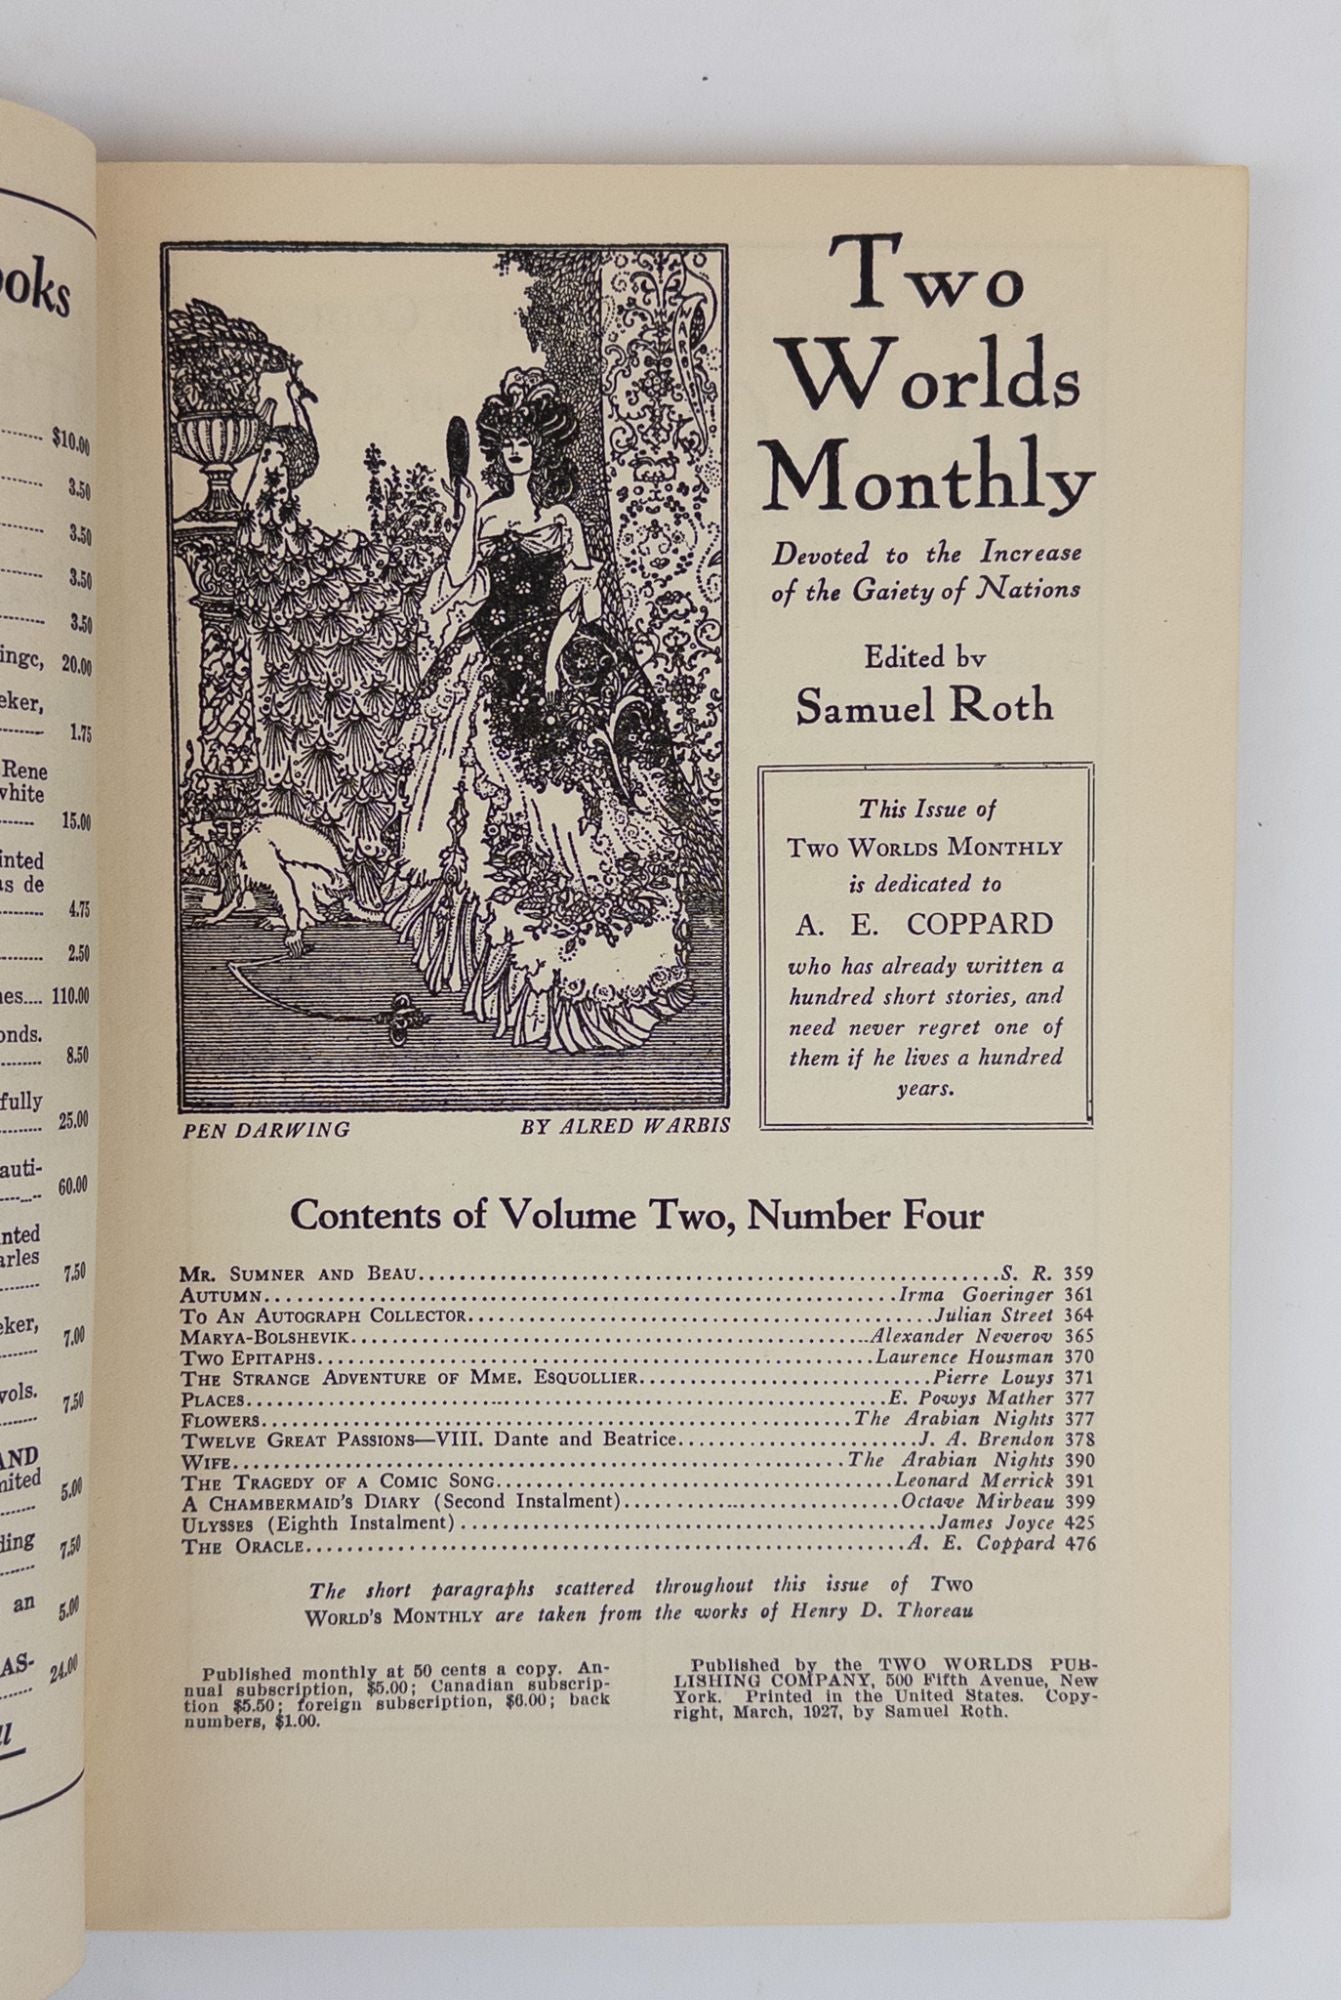 Product Image for TWO WORLDS MONTHLY; DEVOTED TO THE INCREASE OF THE GAIETY OF NATIONS [Eleven parts]